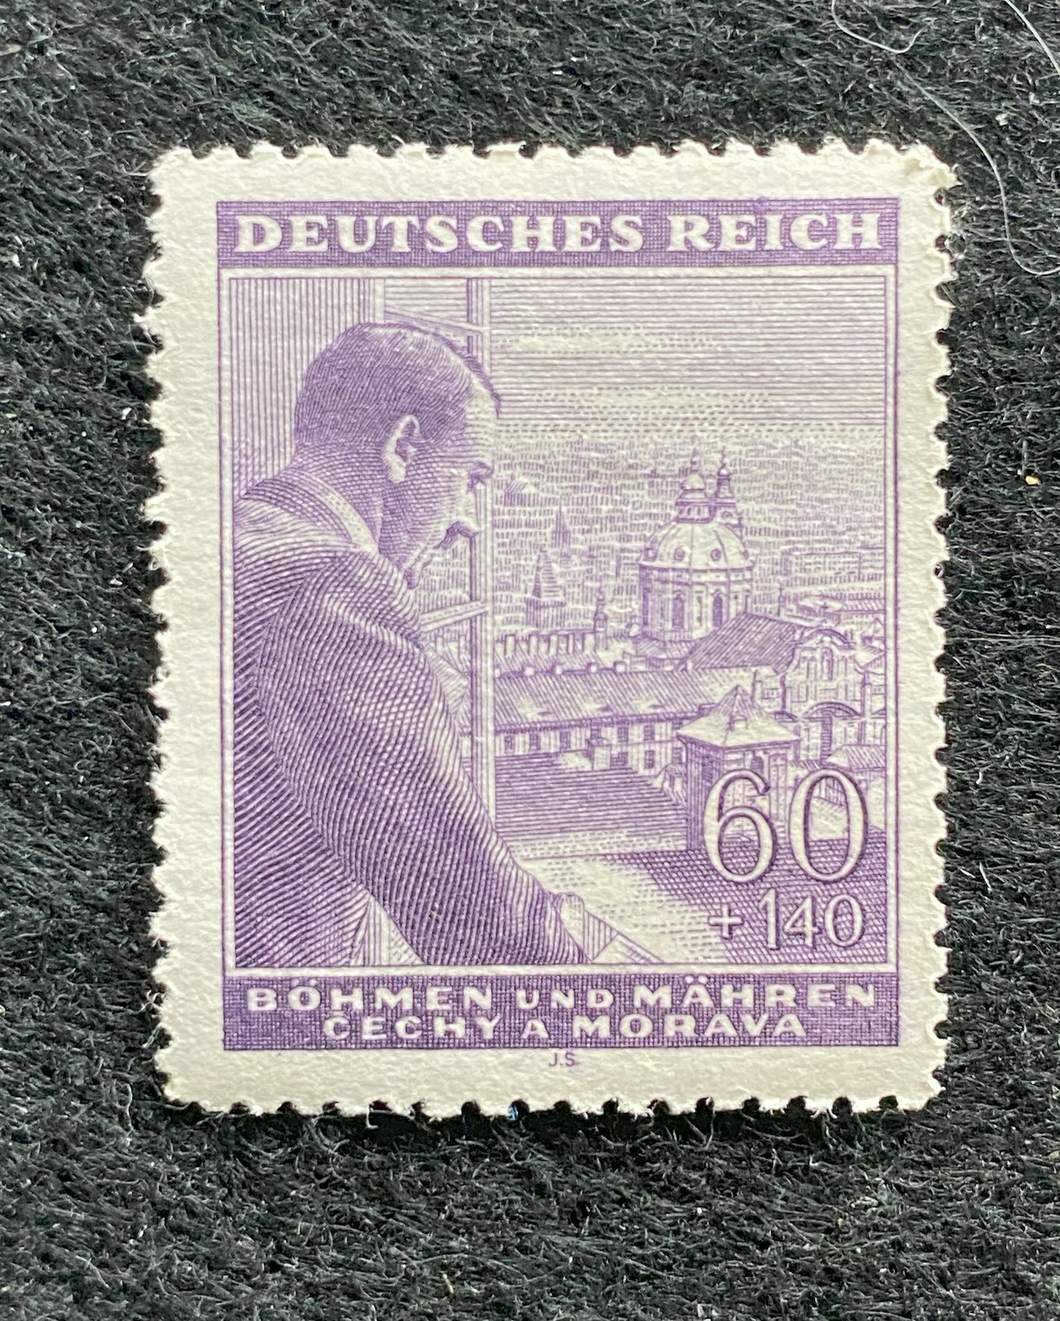 Rare Old Antique Authentic WWII German Hitler Unused Stamp - 60 Rp